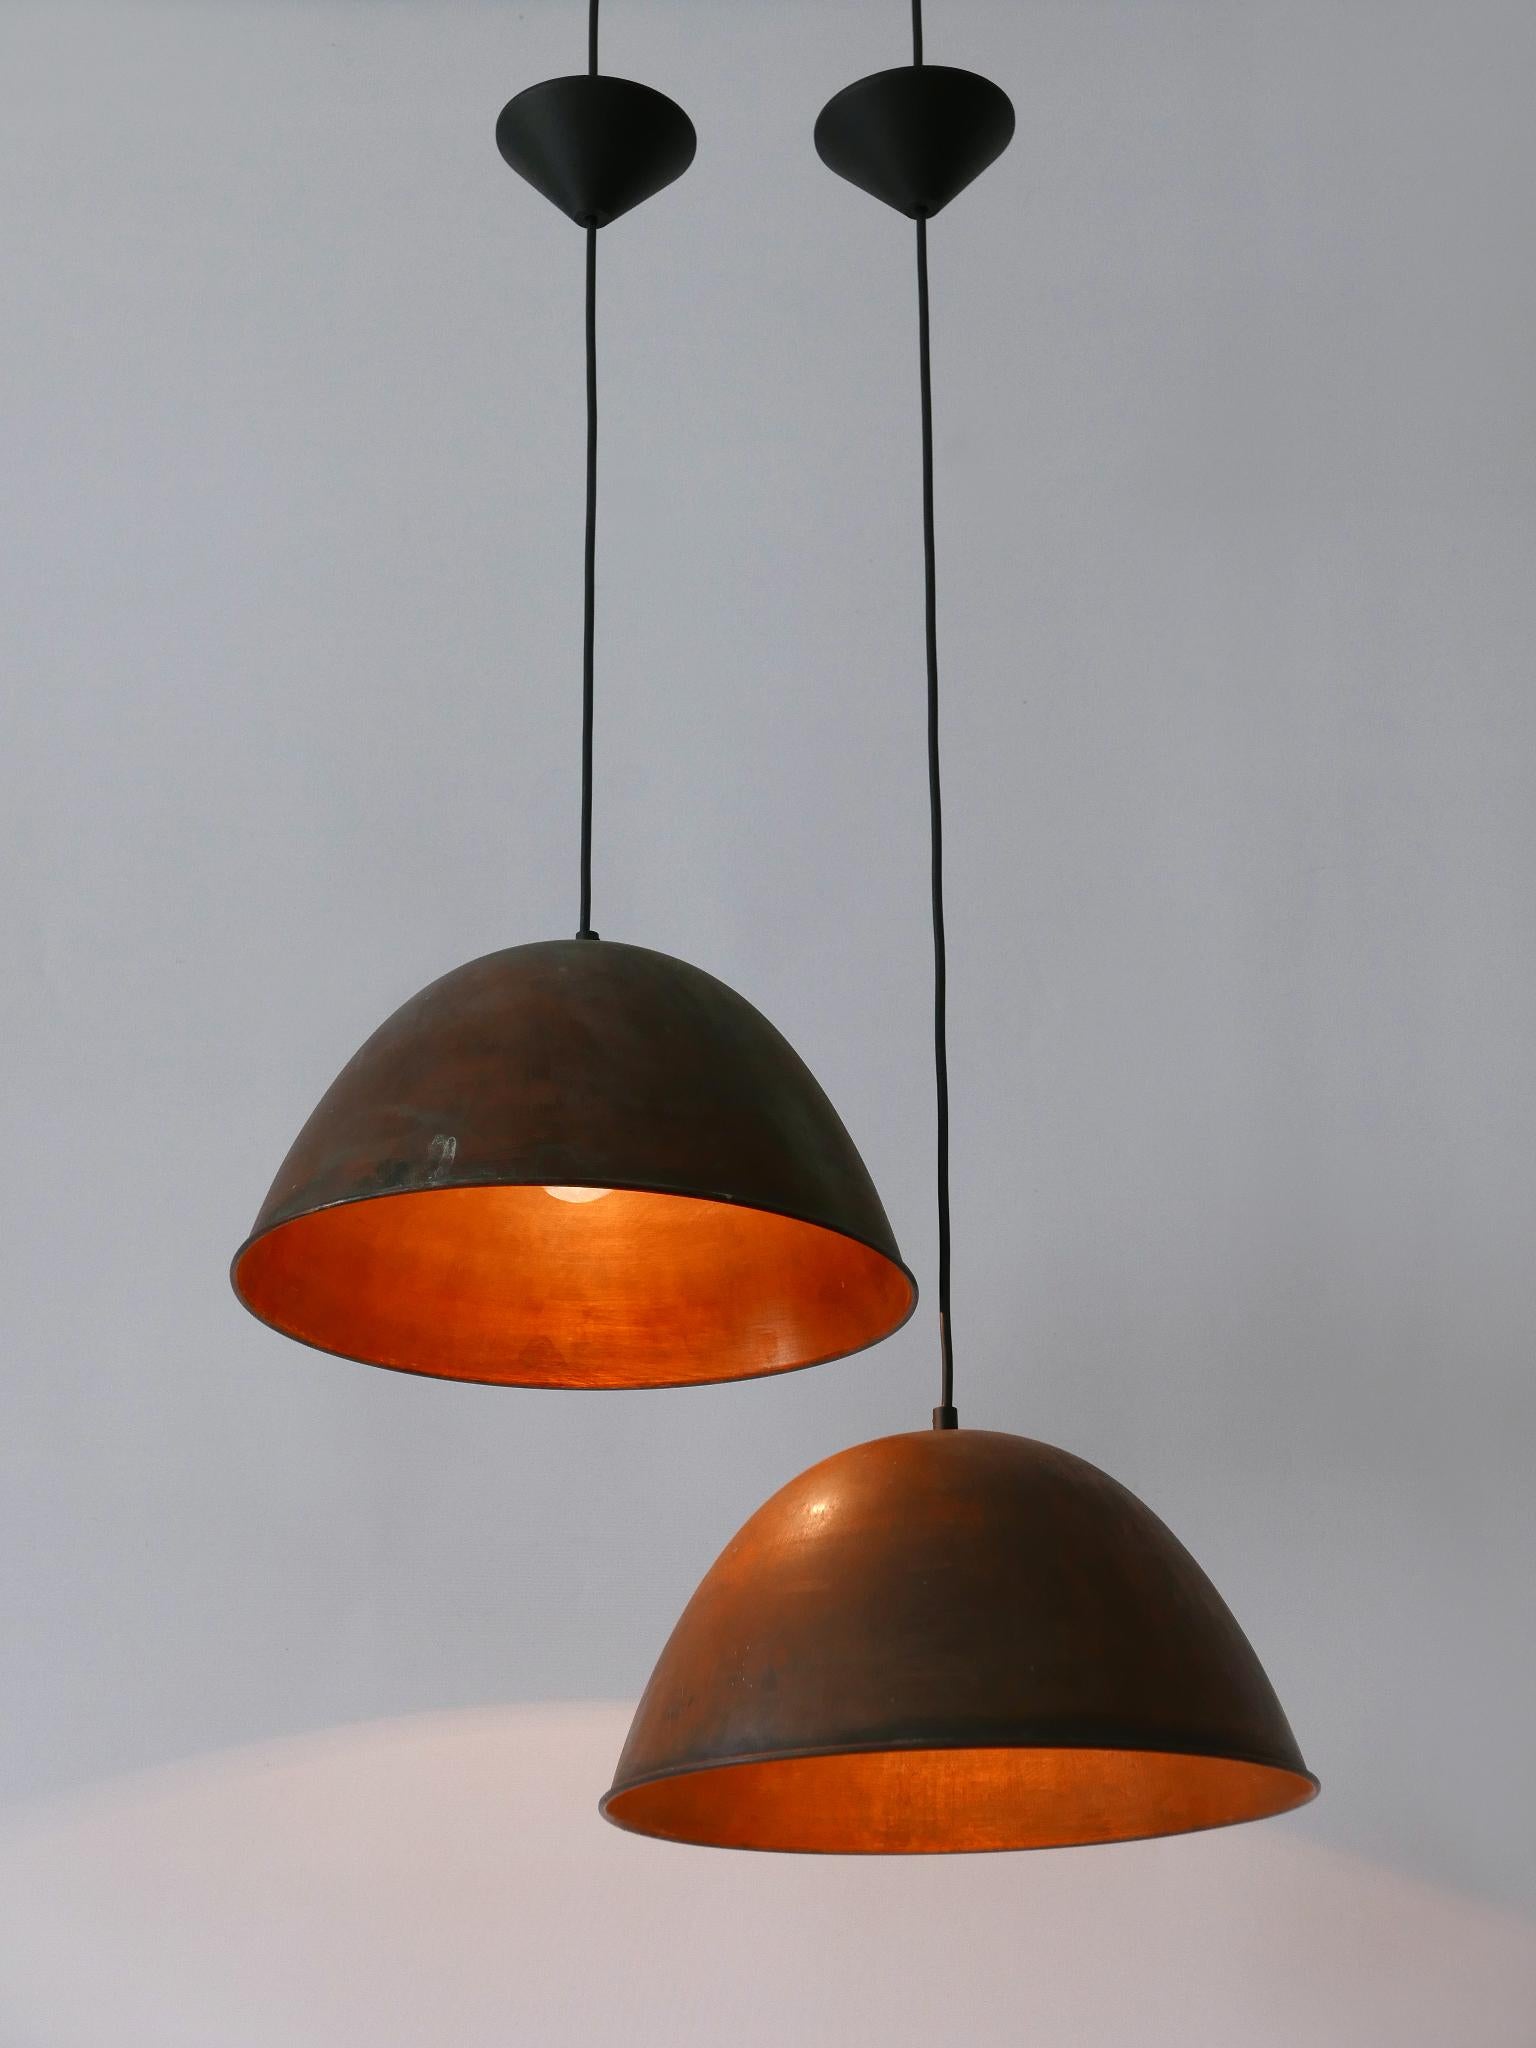 Set of Two Mid-Century Modern Copper Pendant Lamps or Hanging Lights 1950s For Sale 7